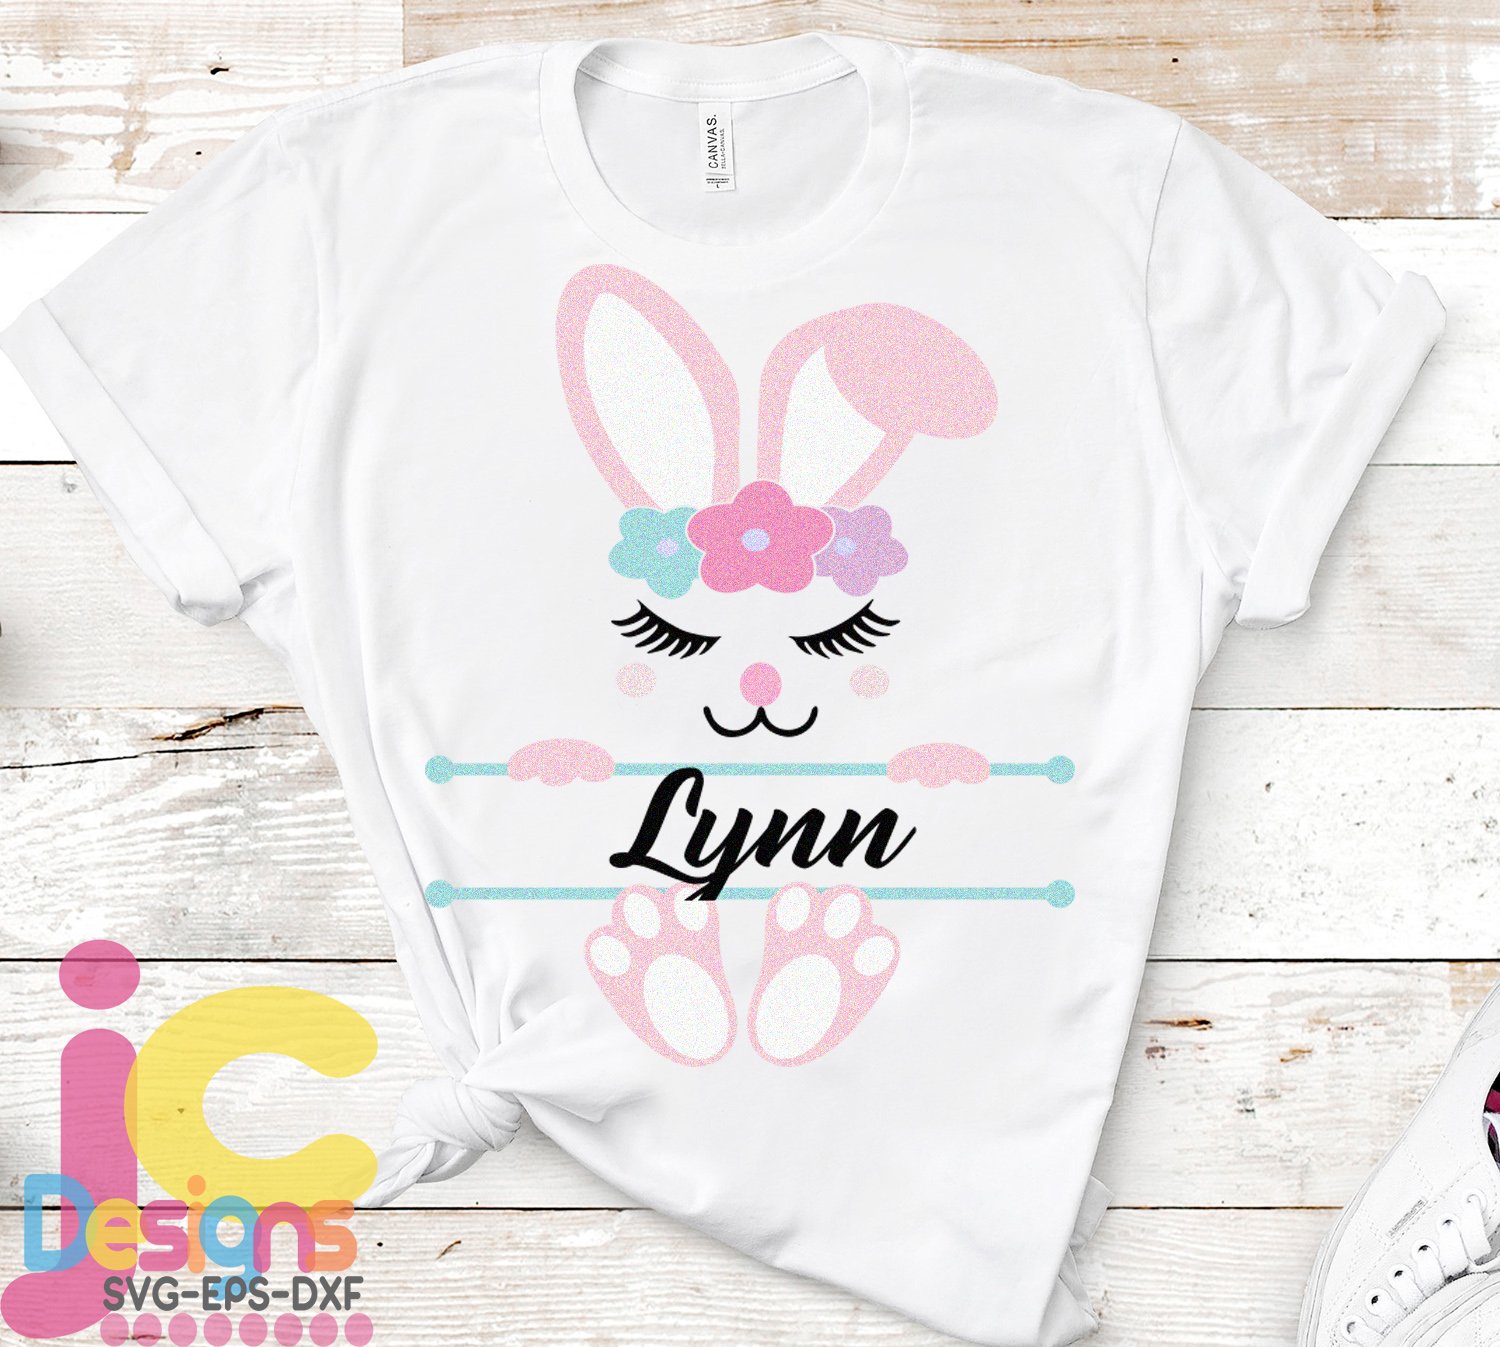 So cute pink easter rabbit on the t-shirt.